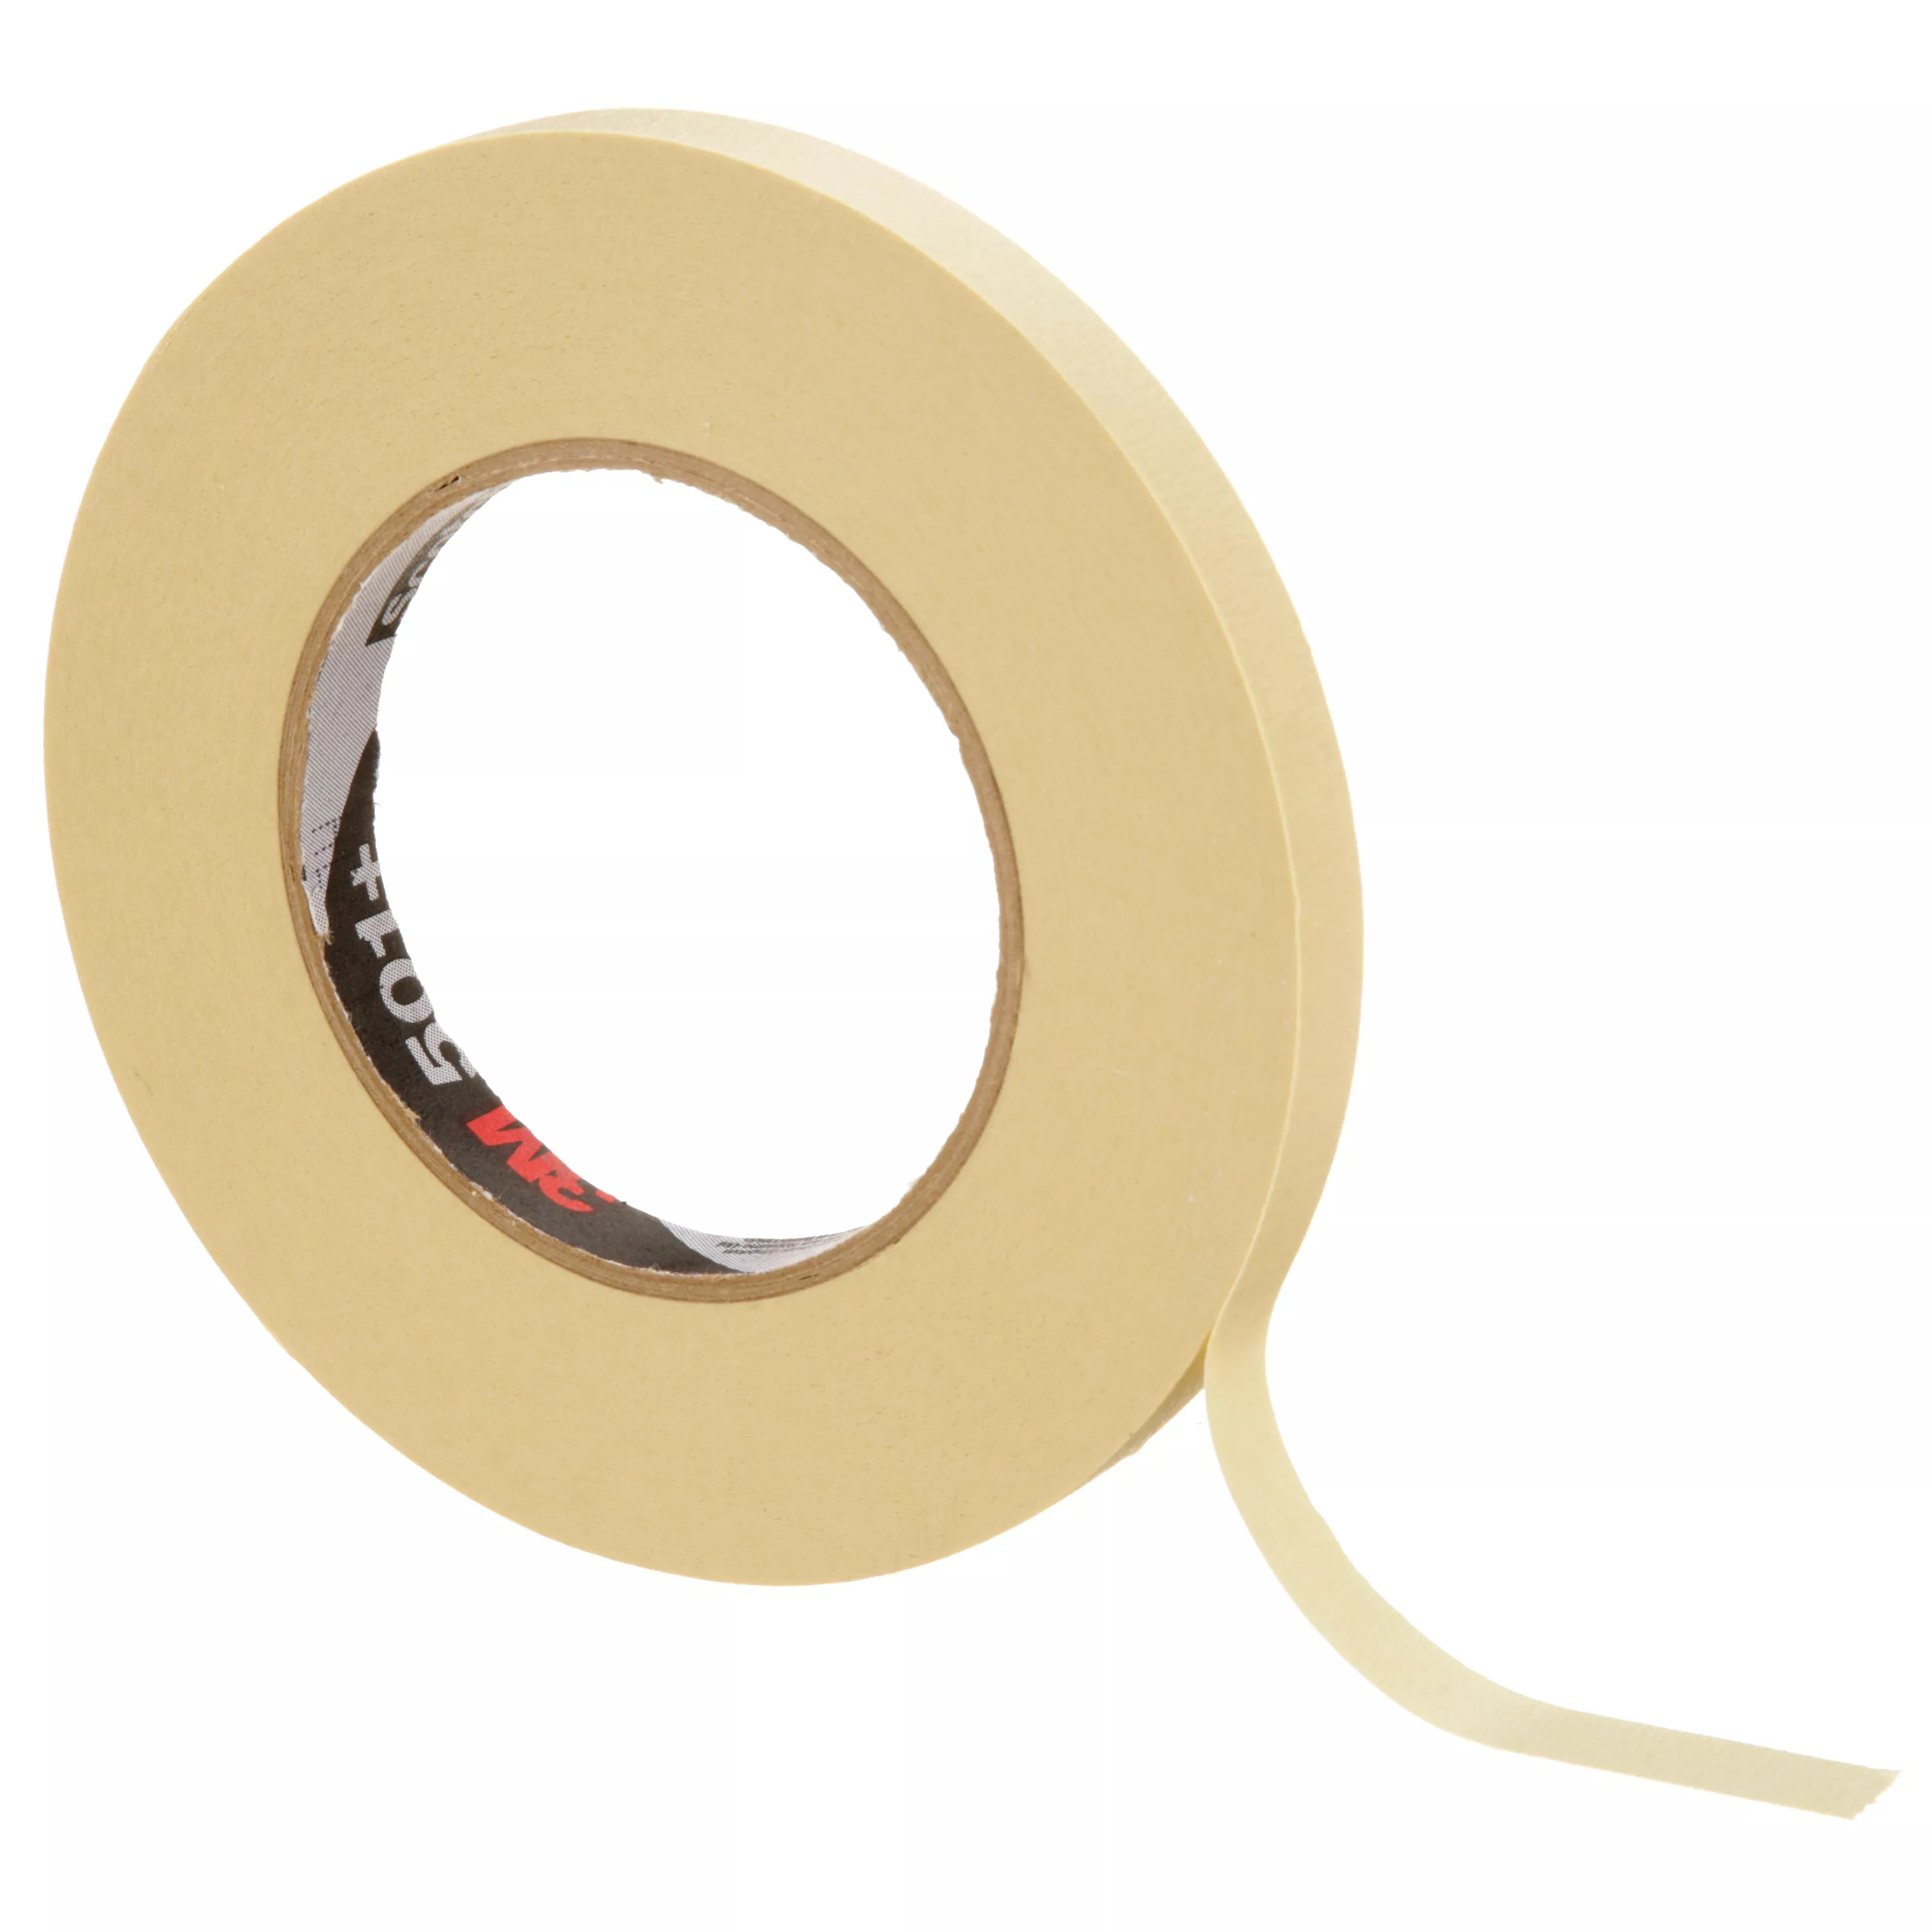 SKU 7100109550 | 3M™ Specialty High Temperature Masking Tape 501+